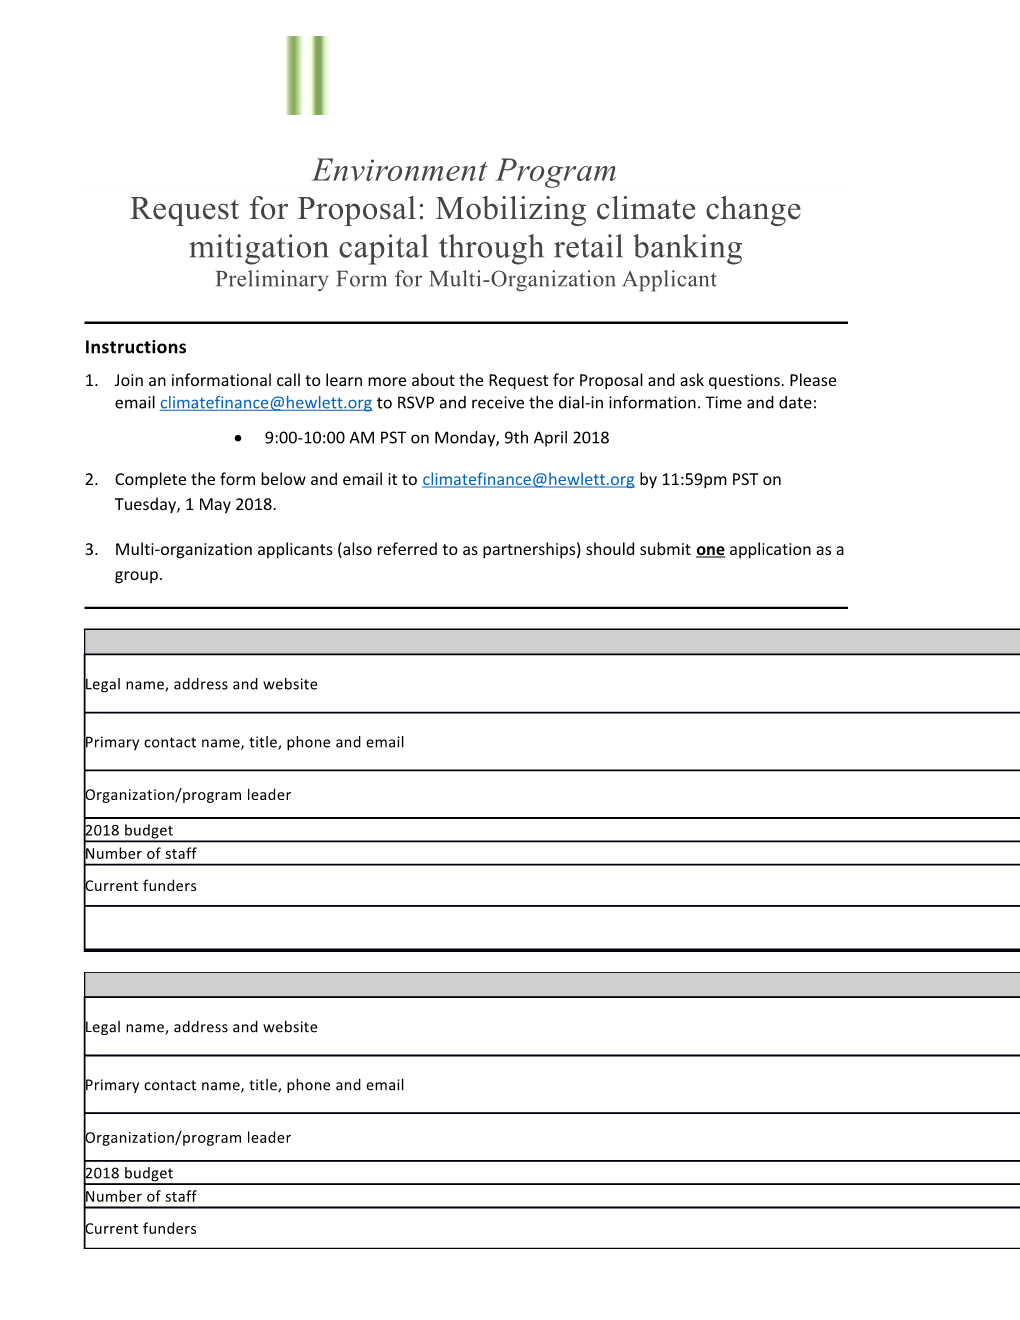 Request for Proposal: Mobilizing Climate Change Mitigation Capital Through Retail Banking